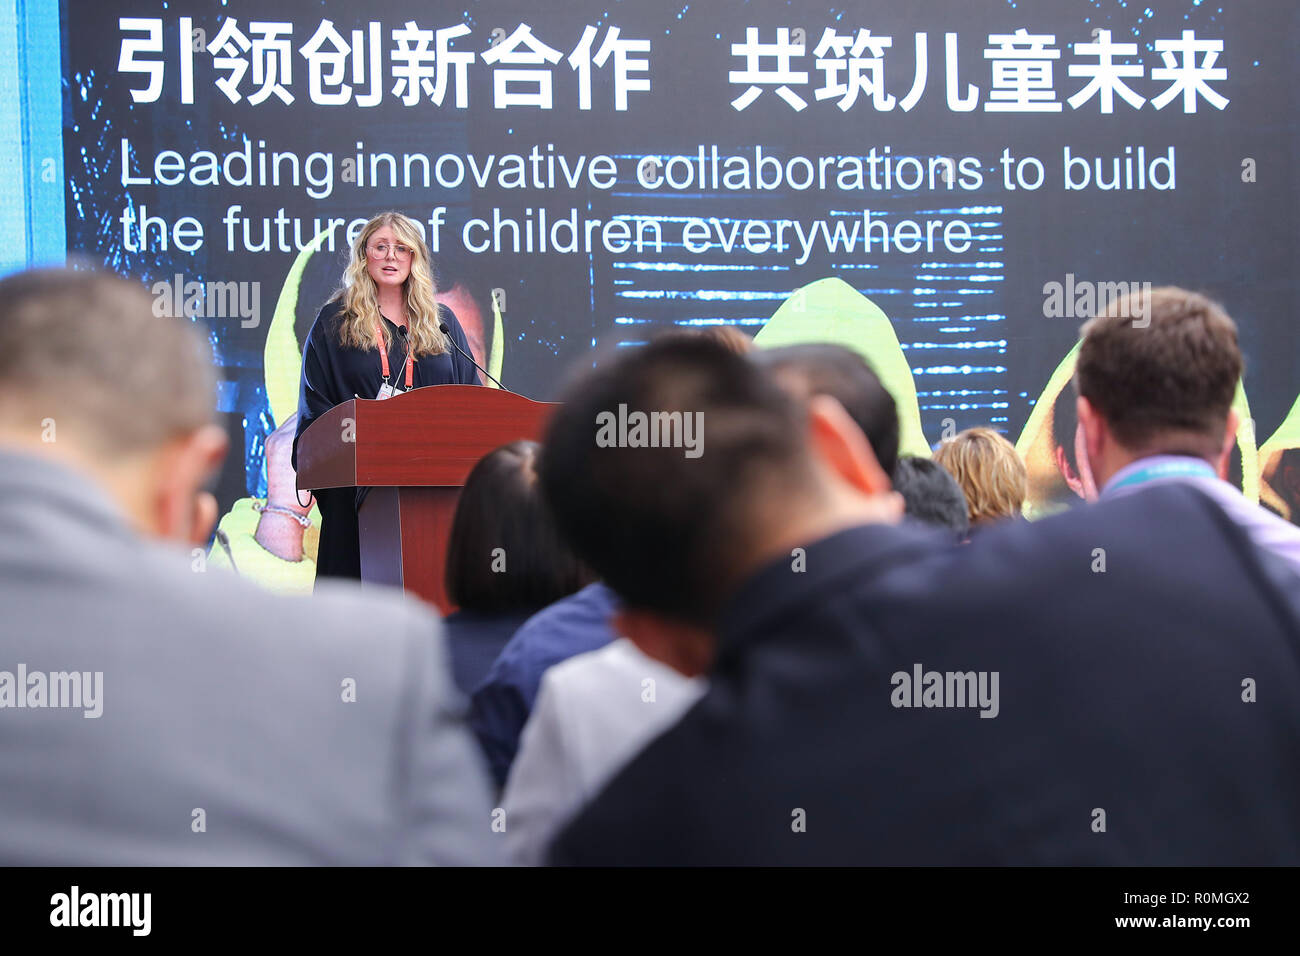 (181106) -- SHANGHAI, Nov. 6, 2018 (Xinhua) -- Shanelle Hall, deputy executive director of the United Nations Children's Fund (UNICEF), delivers a speech at a forum with the theme of 'Leading innovative collaborations to build the future of children everywhere' during the first China International Import Expo (CIIE) in Shanghai, east China, Nov. 6, 2018. (Xinhua/Zhang Yuwei) Stock Photo